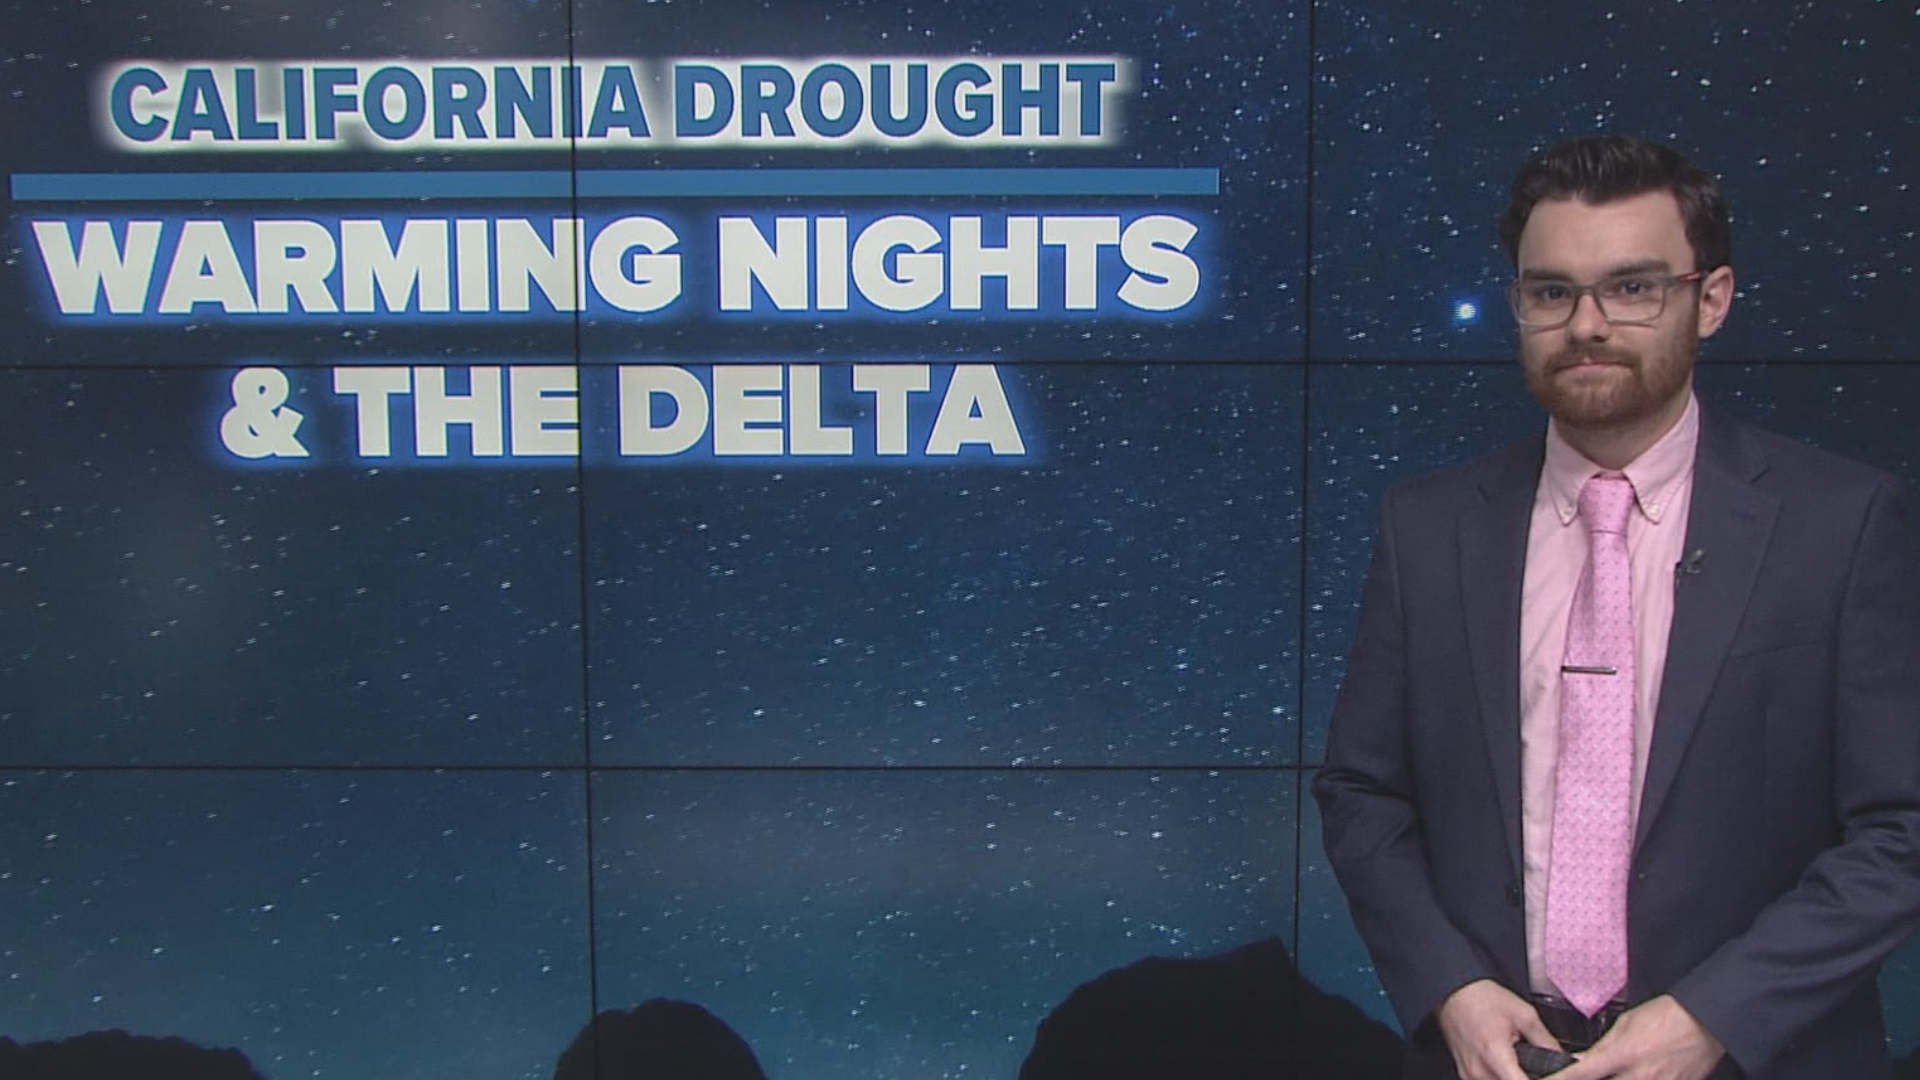 ABC10 meteorologist Brenden Mincheff looks at the snowpack & water storage amid the heatwave, how climate change is making nights warmer, & the Delta's key role